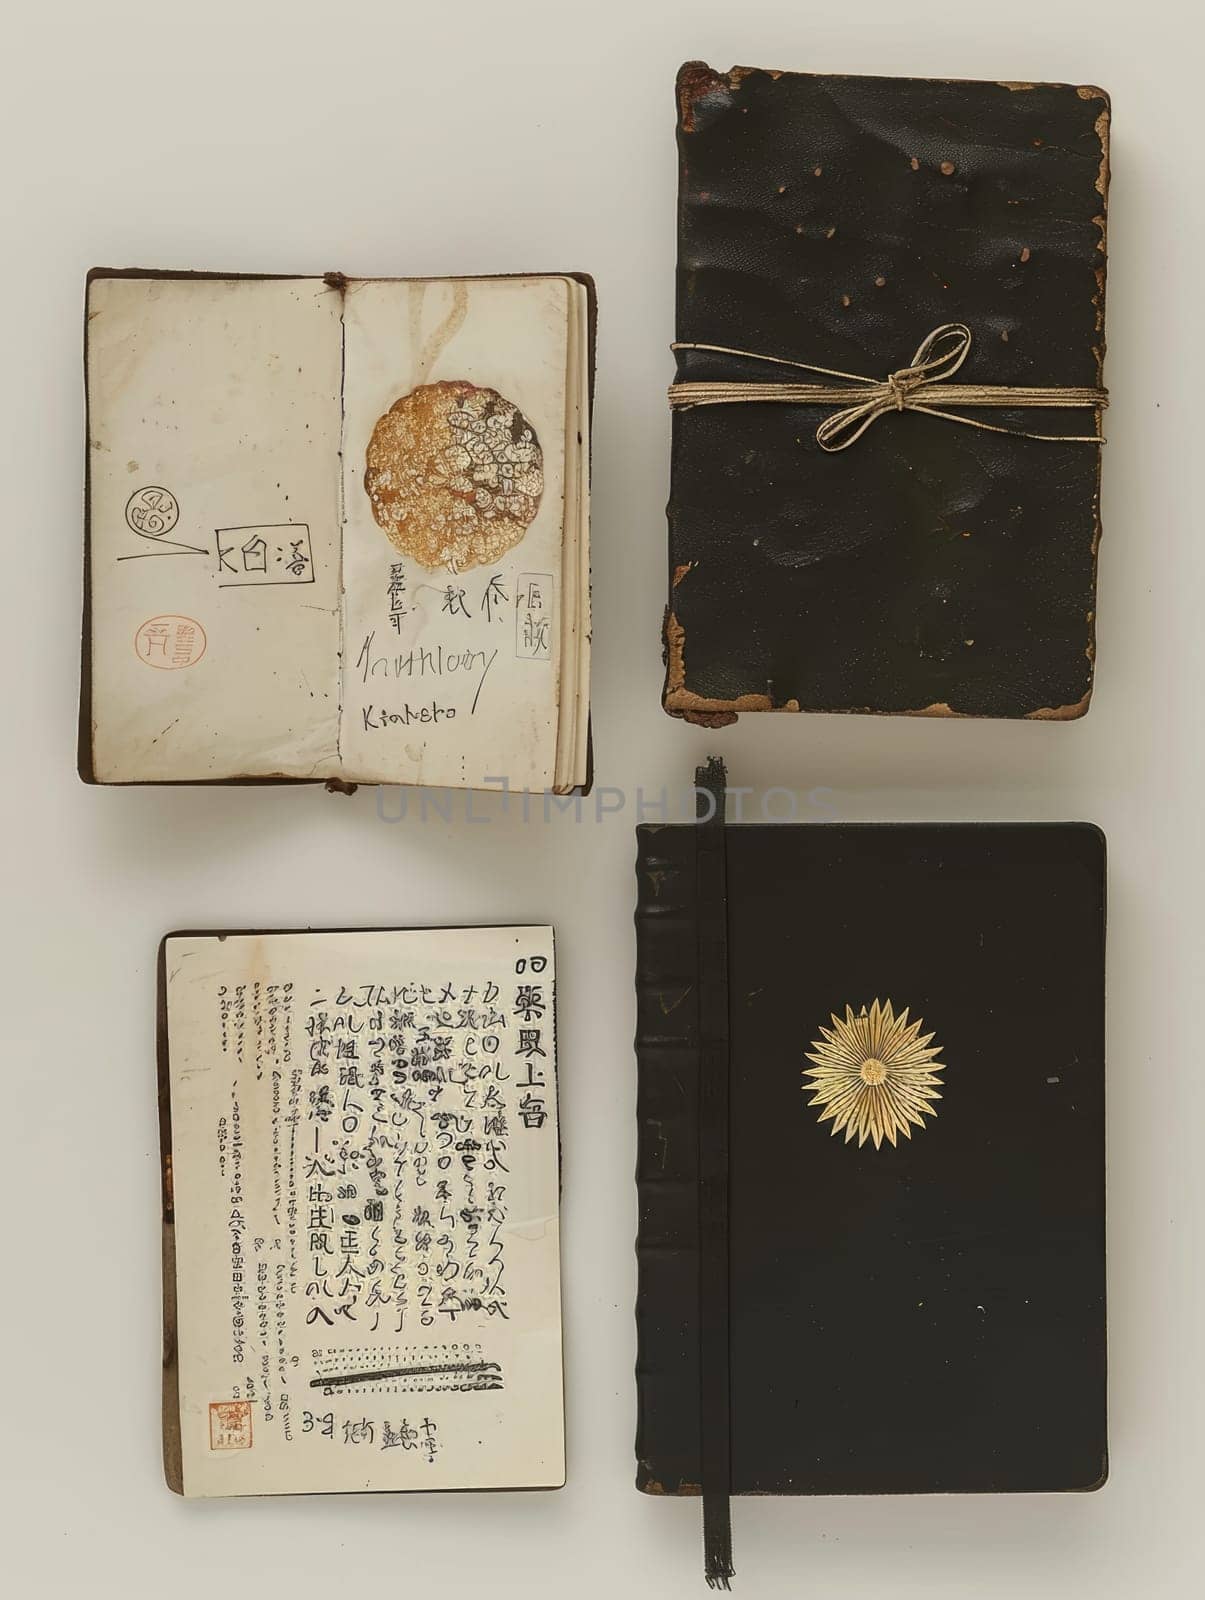 Traditional Japanese bound texts paired with an ornate golden seal, presenting a connection to Japans rich literary and historical past. by sfinks